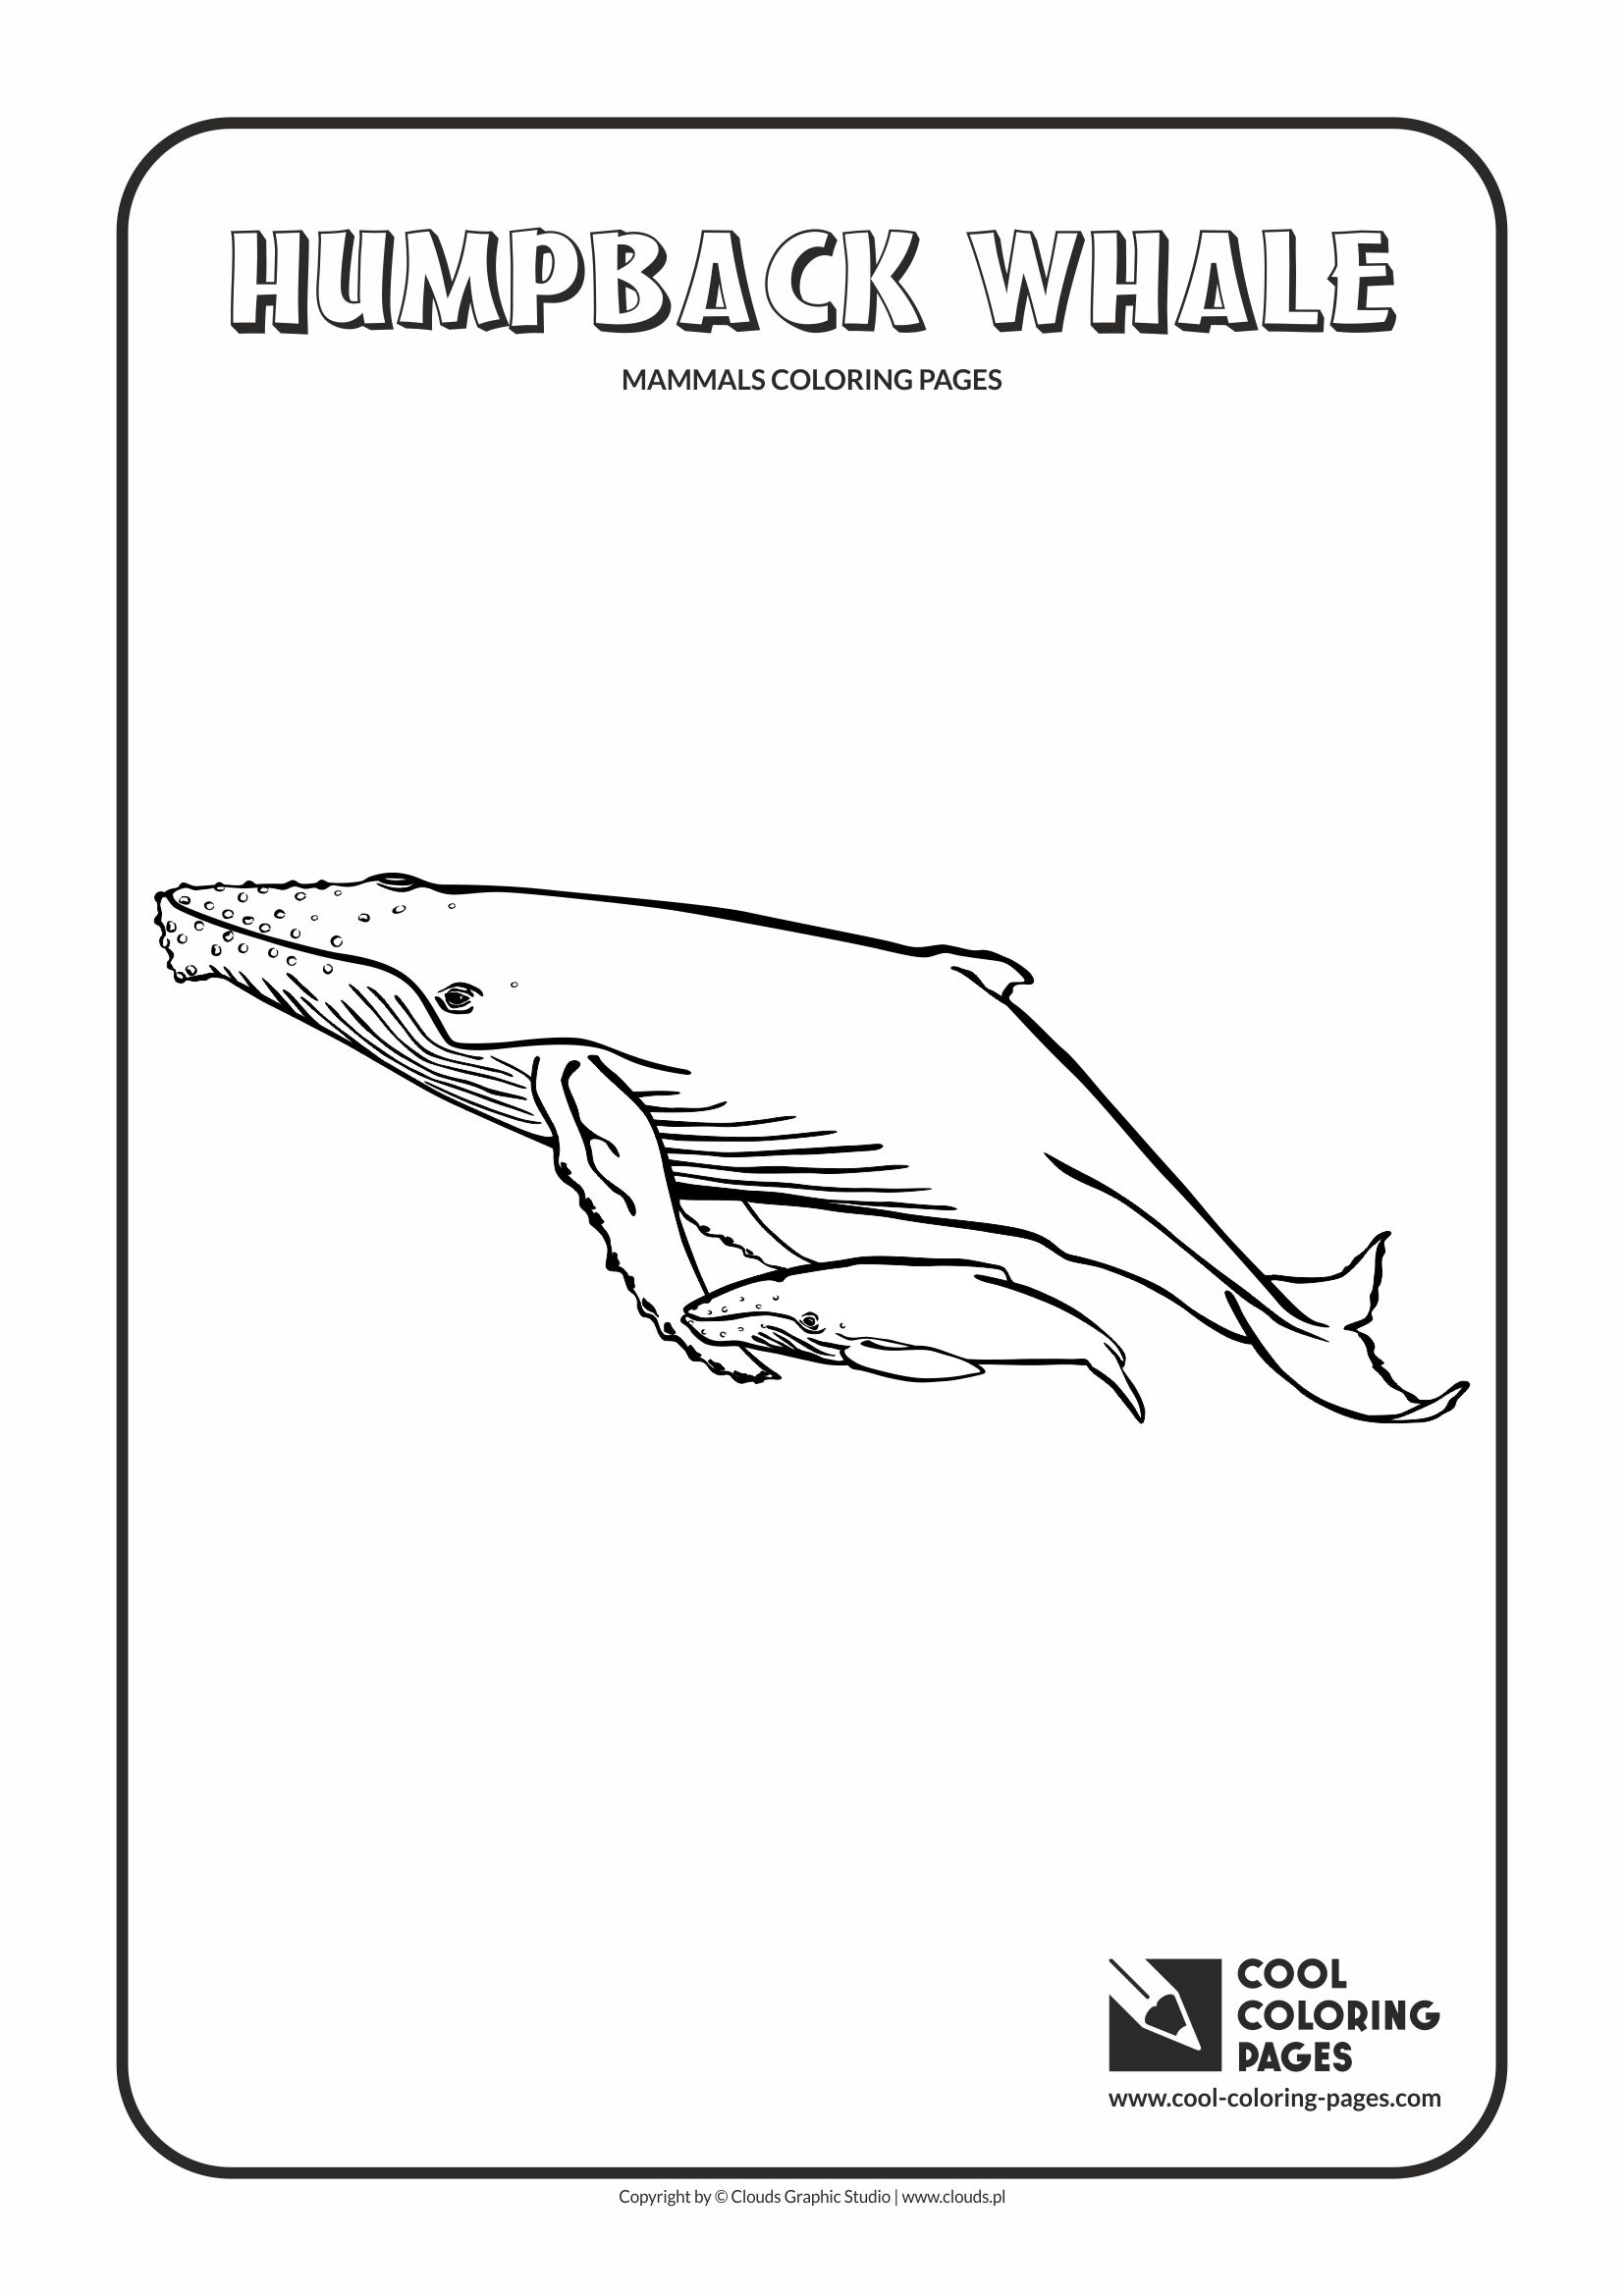 Cool Coloring Pages Humpback whale coloring page   Cool Coloring ...